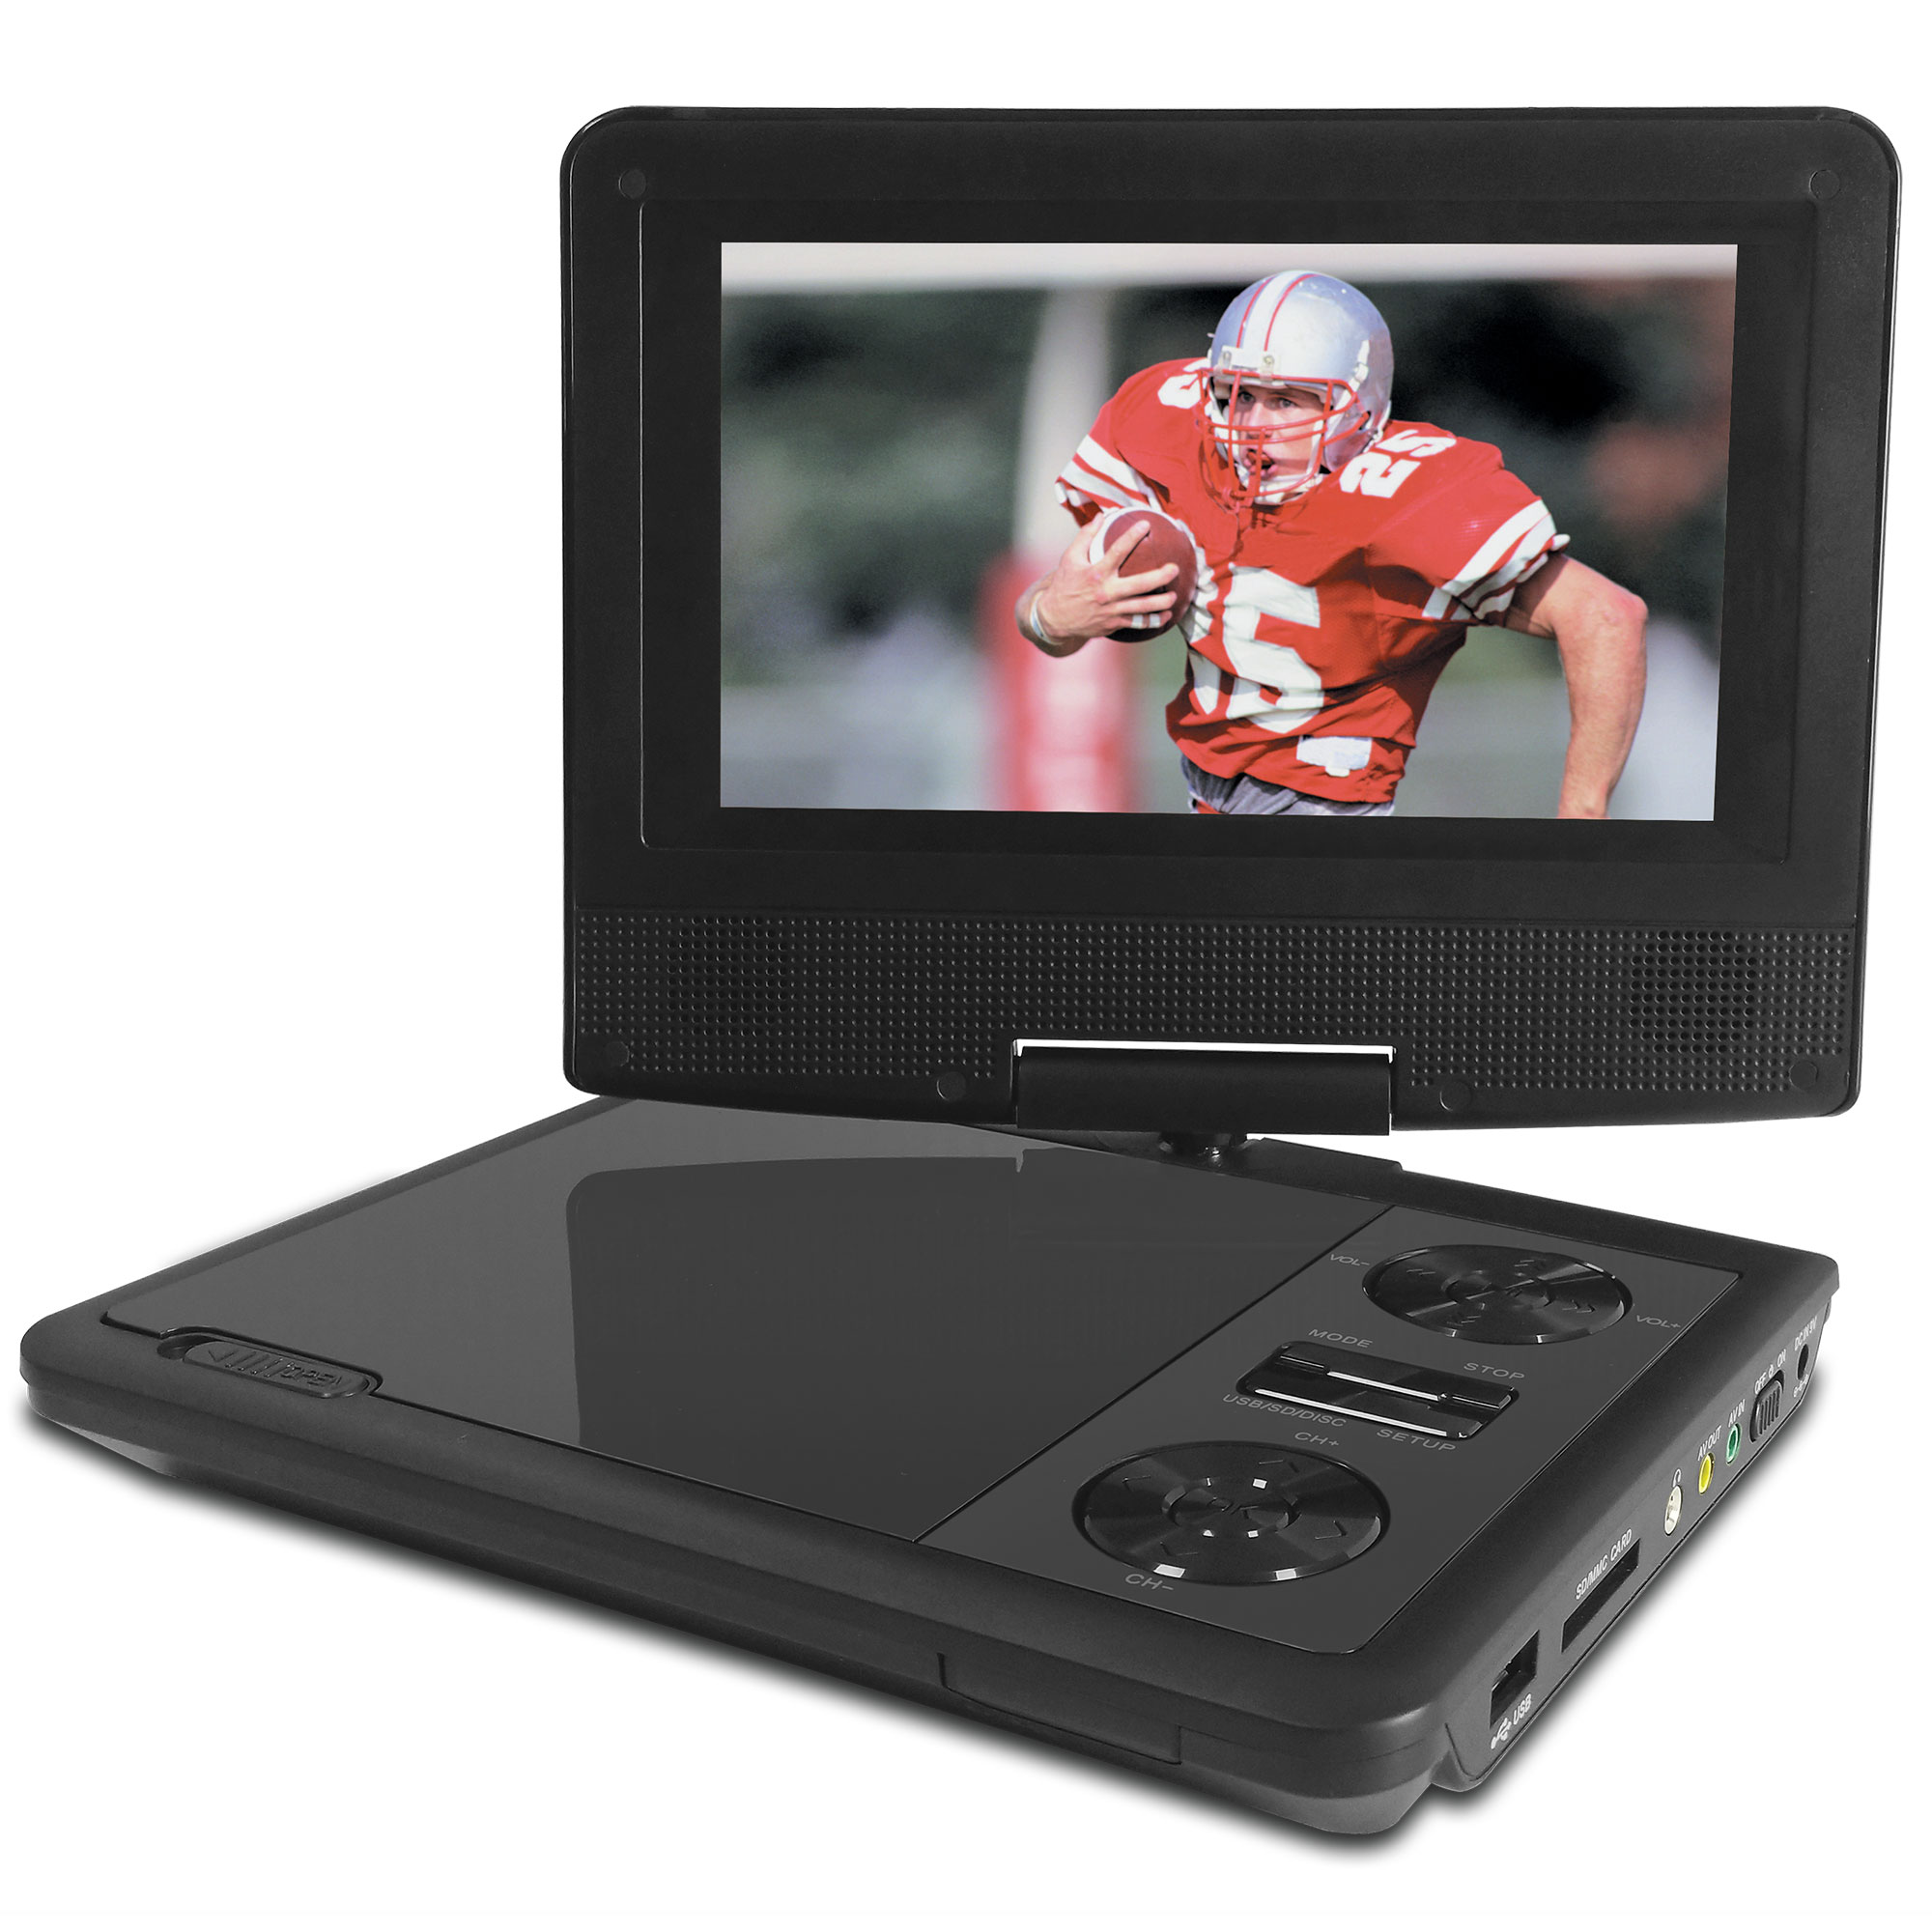 Audiobox inch Portable DVD Player with TV Tuner